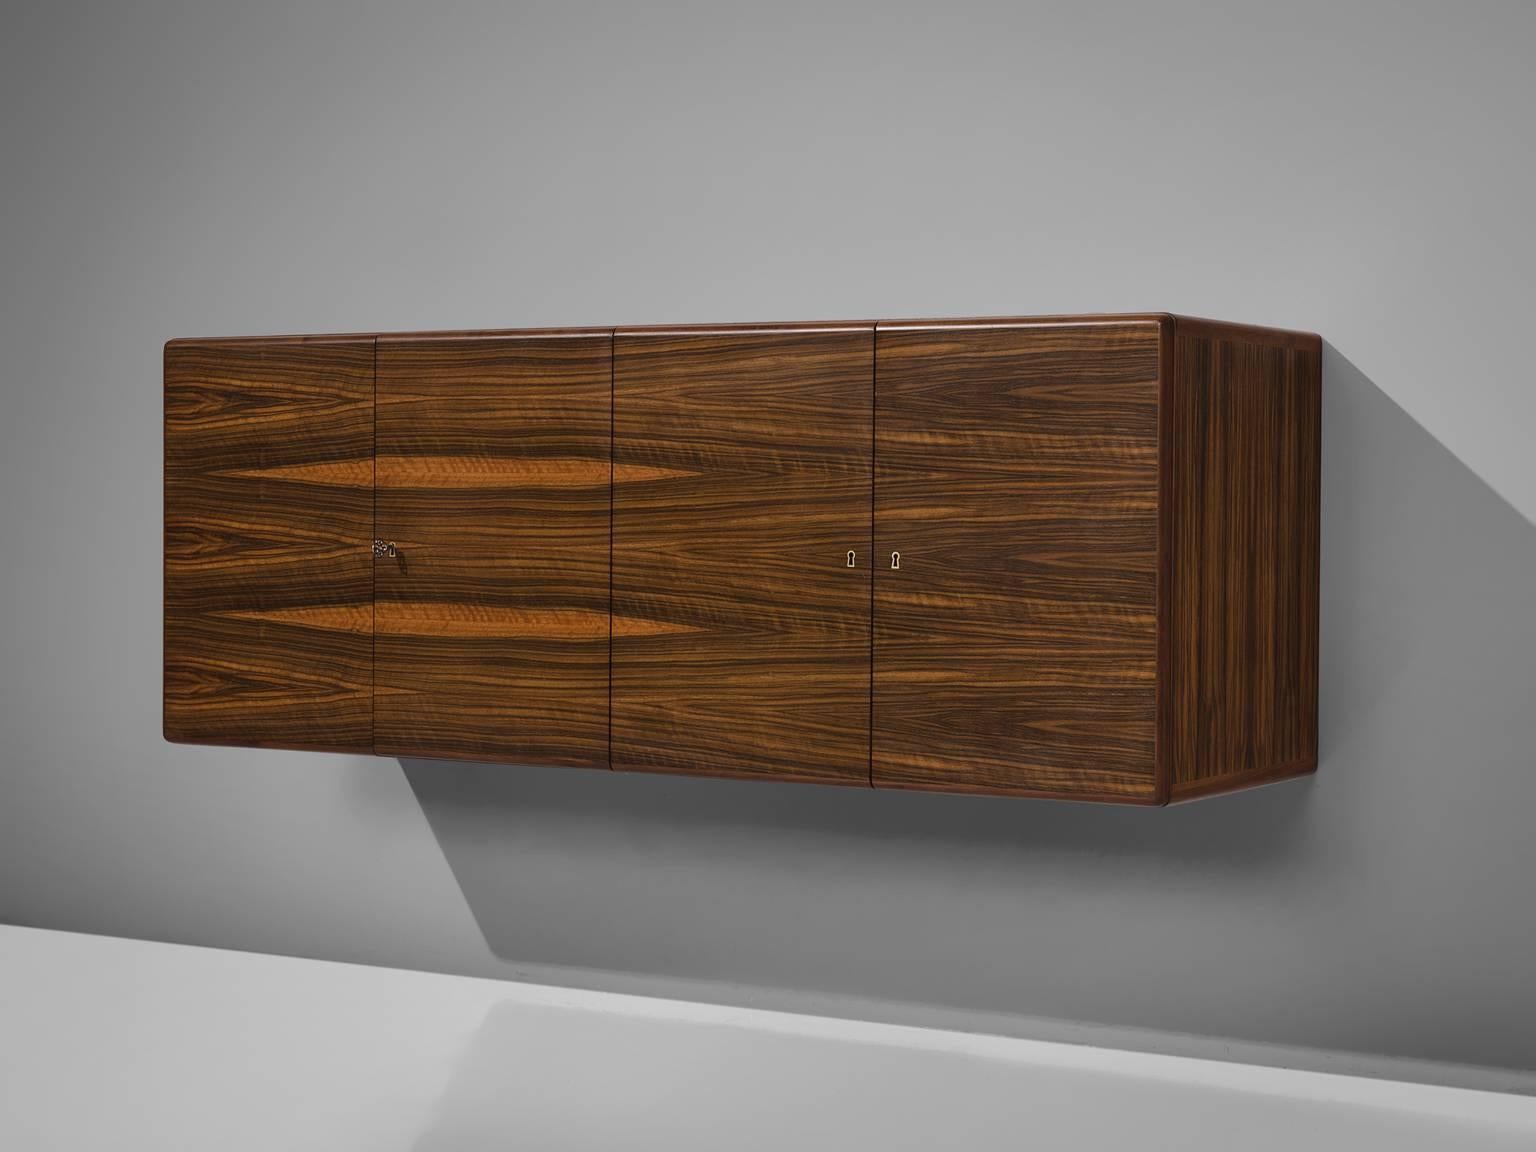 Jos De Mey for Van den Berghe-Pouvers, rosewood, Belgium, 1960s. 

This modern and Minimalist wall-mounted credenza is designed by Belgium designer Jos De Mey and produced by Van den Berghe-Pouvers. This four-door cabinet features a beautifully